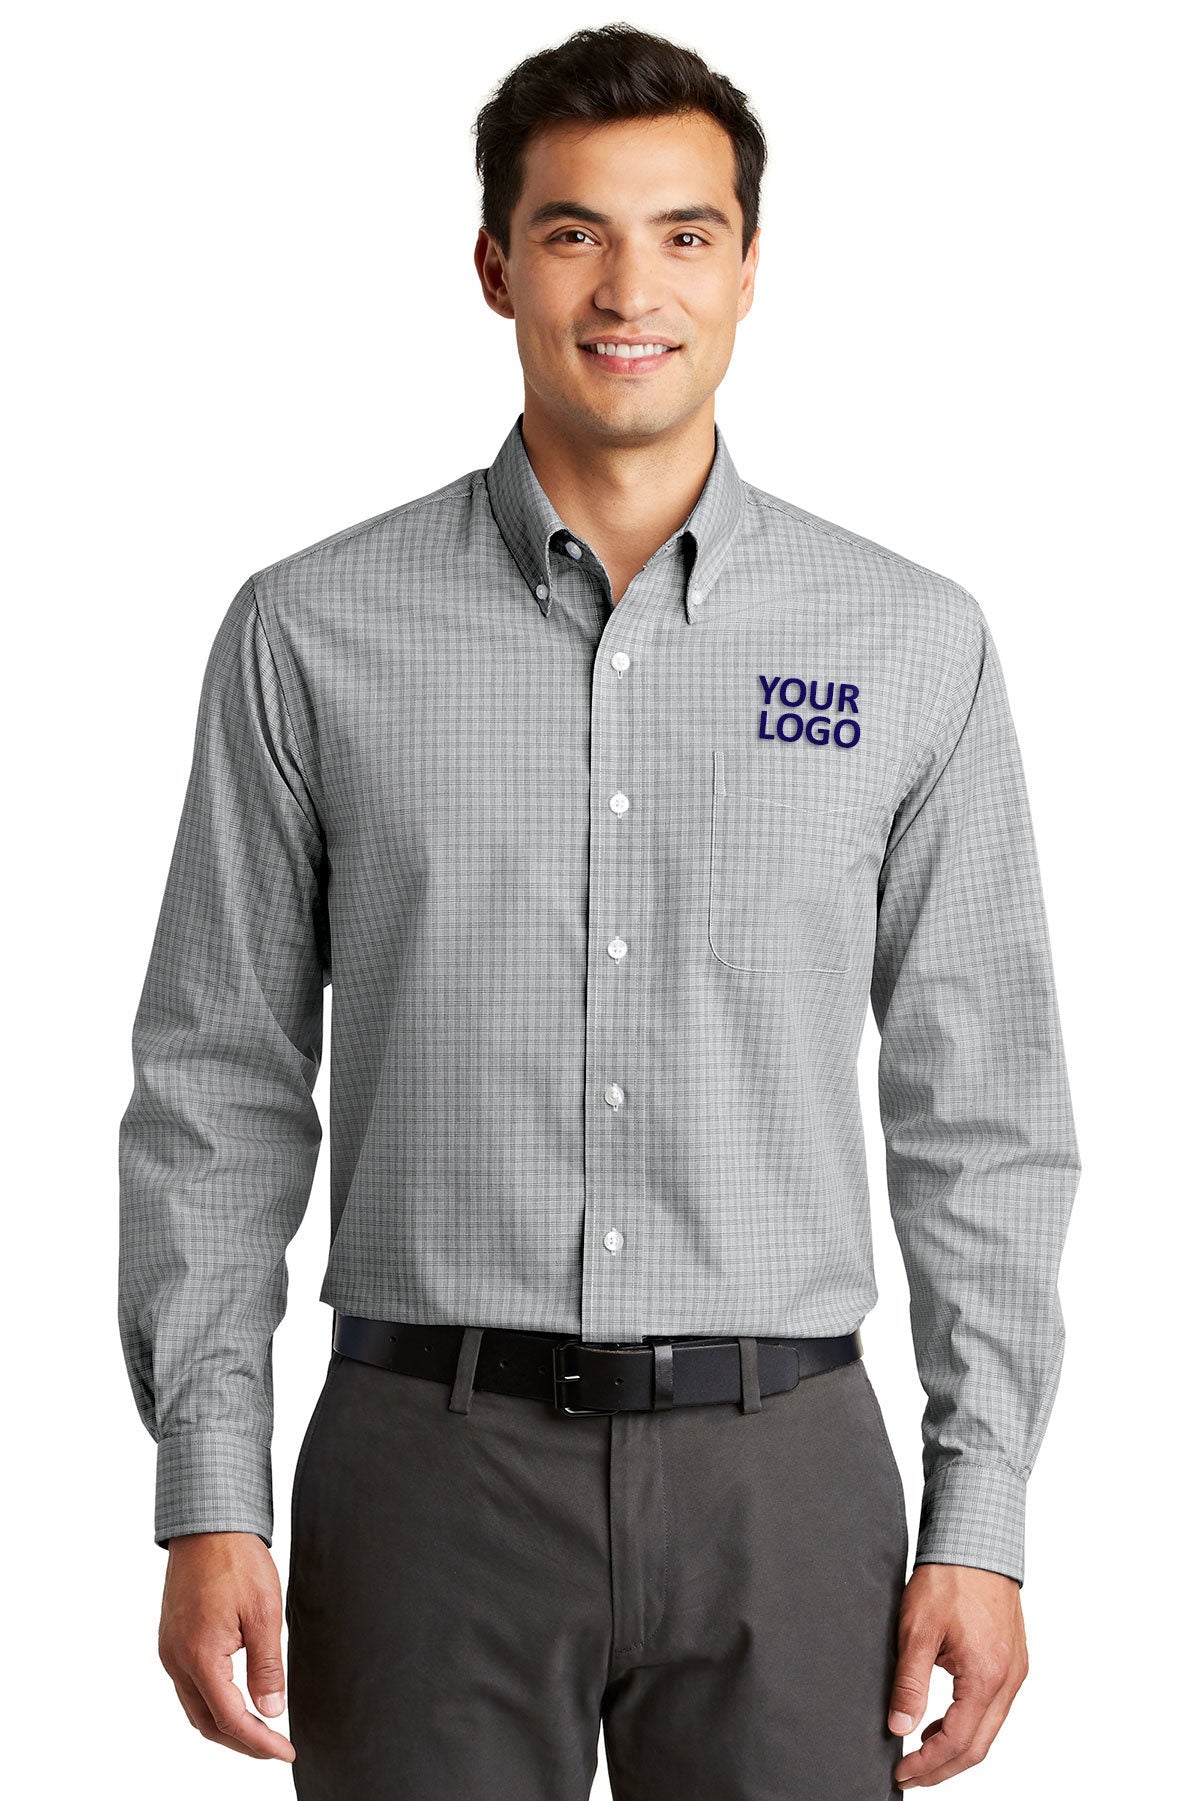 Port Authority Charcoal S639 embroidered work shirts